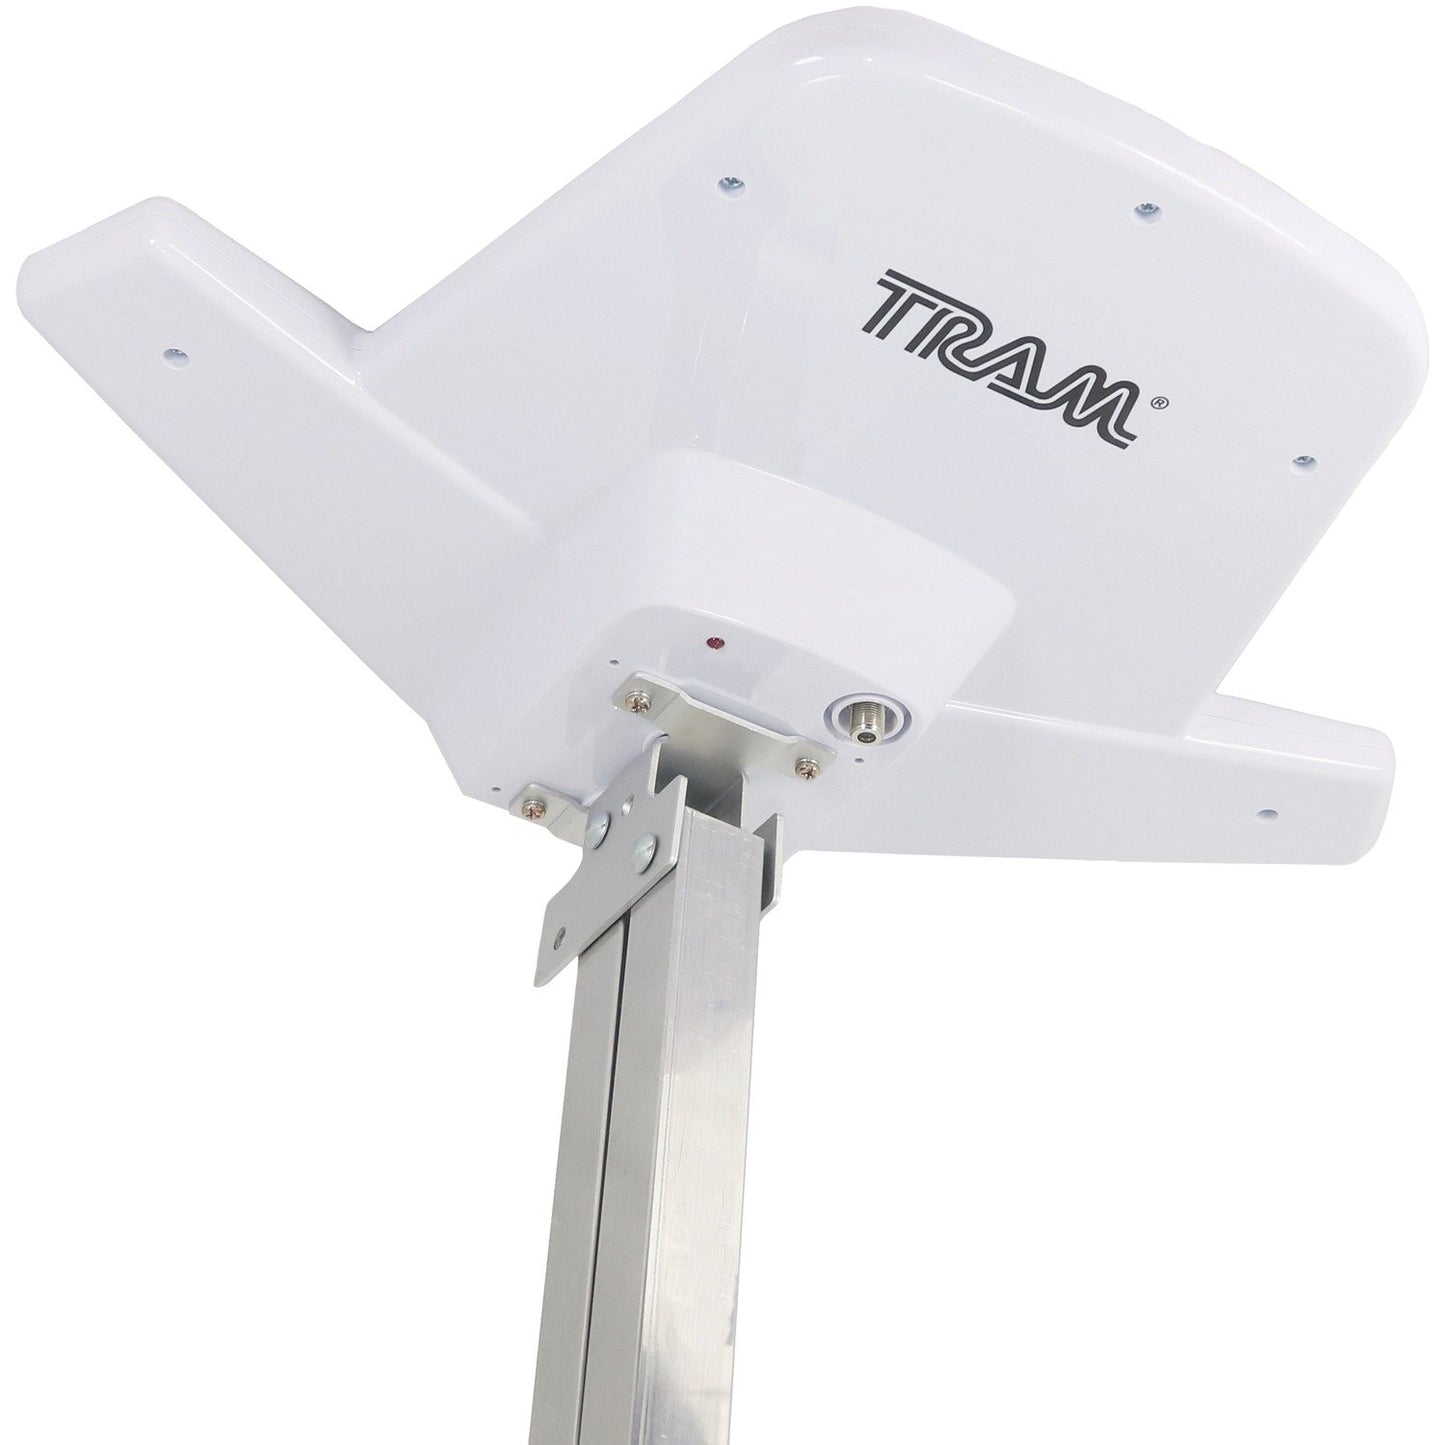 Tram HDTV Digital HDTV Amplified Outdoor Antenna for Home or RV Head Replacement